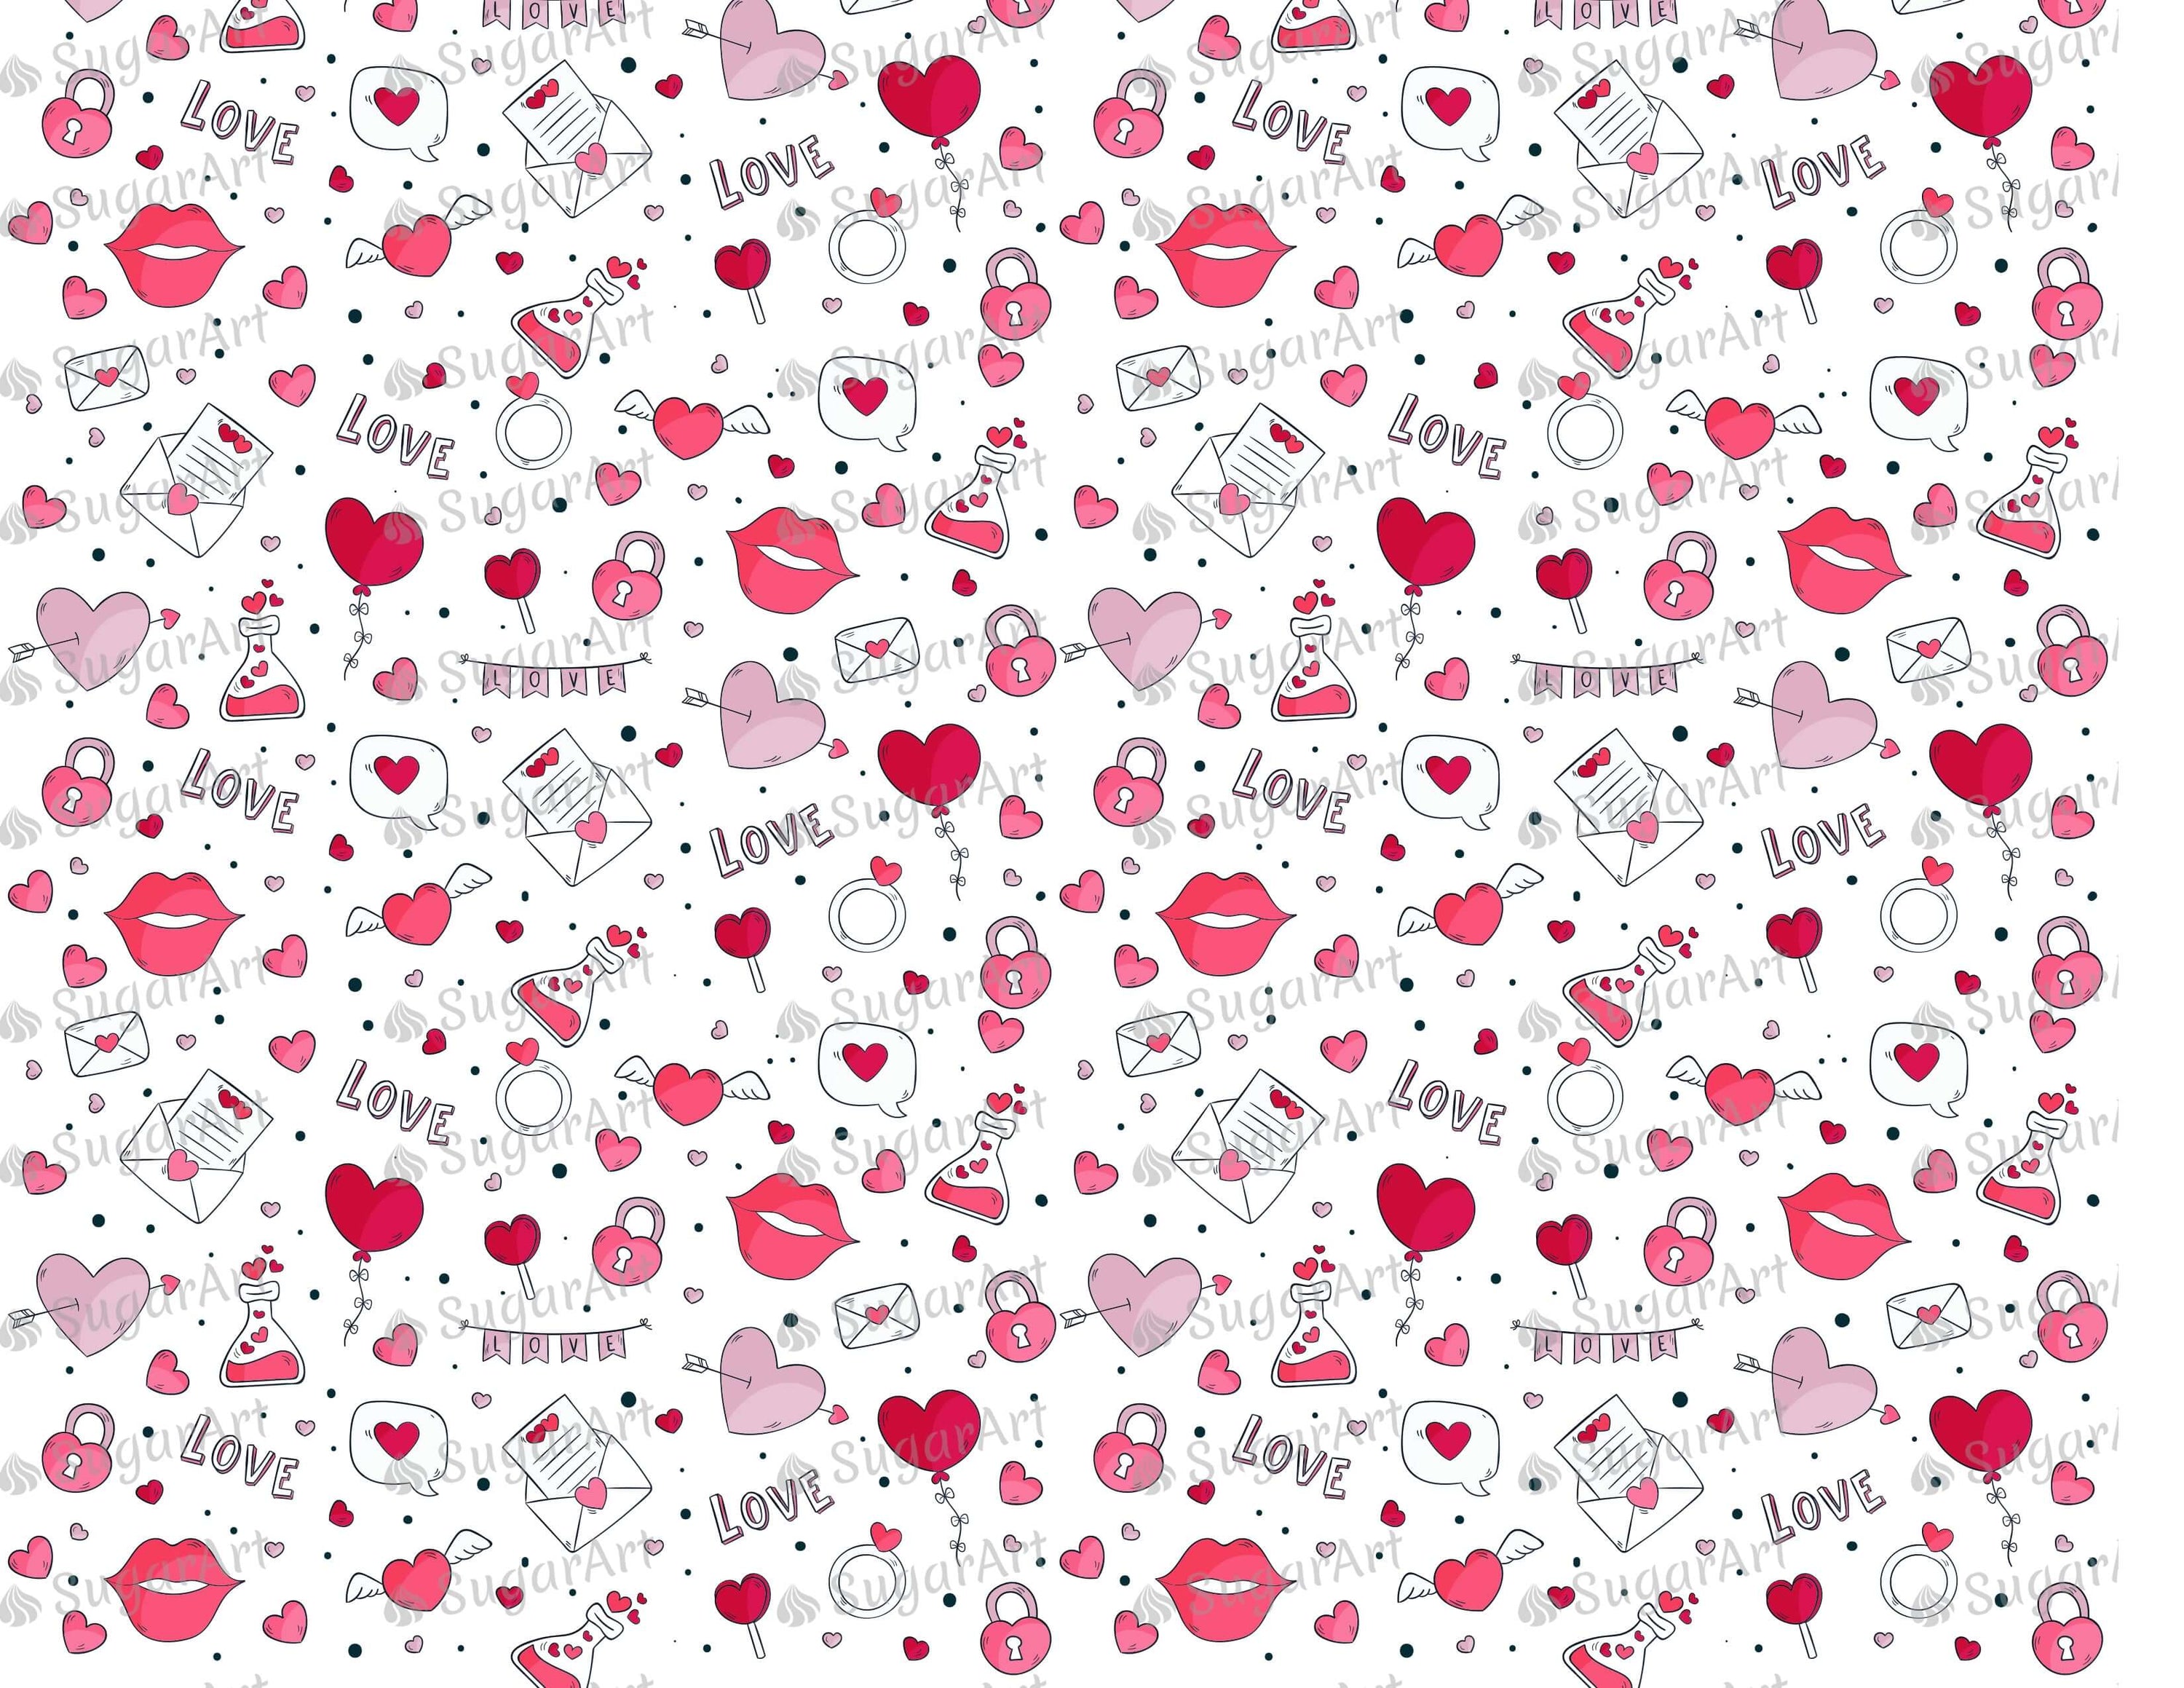 Love Potion Cute Valentine Day Background - Icing - ISA202.